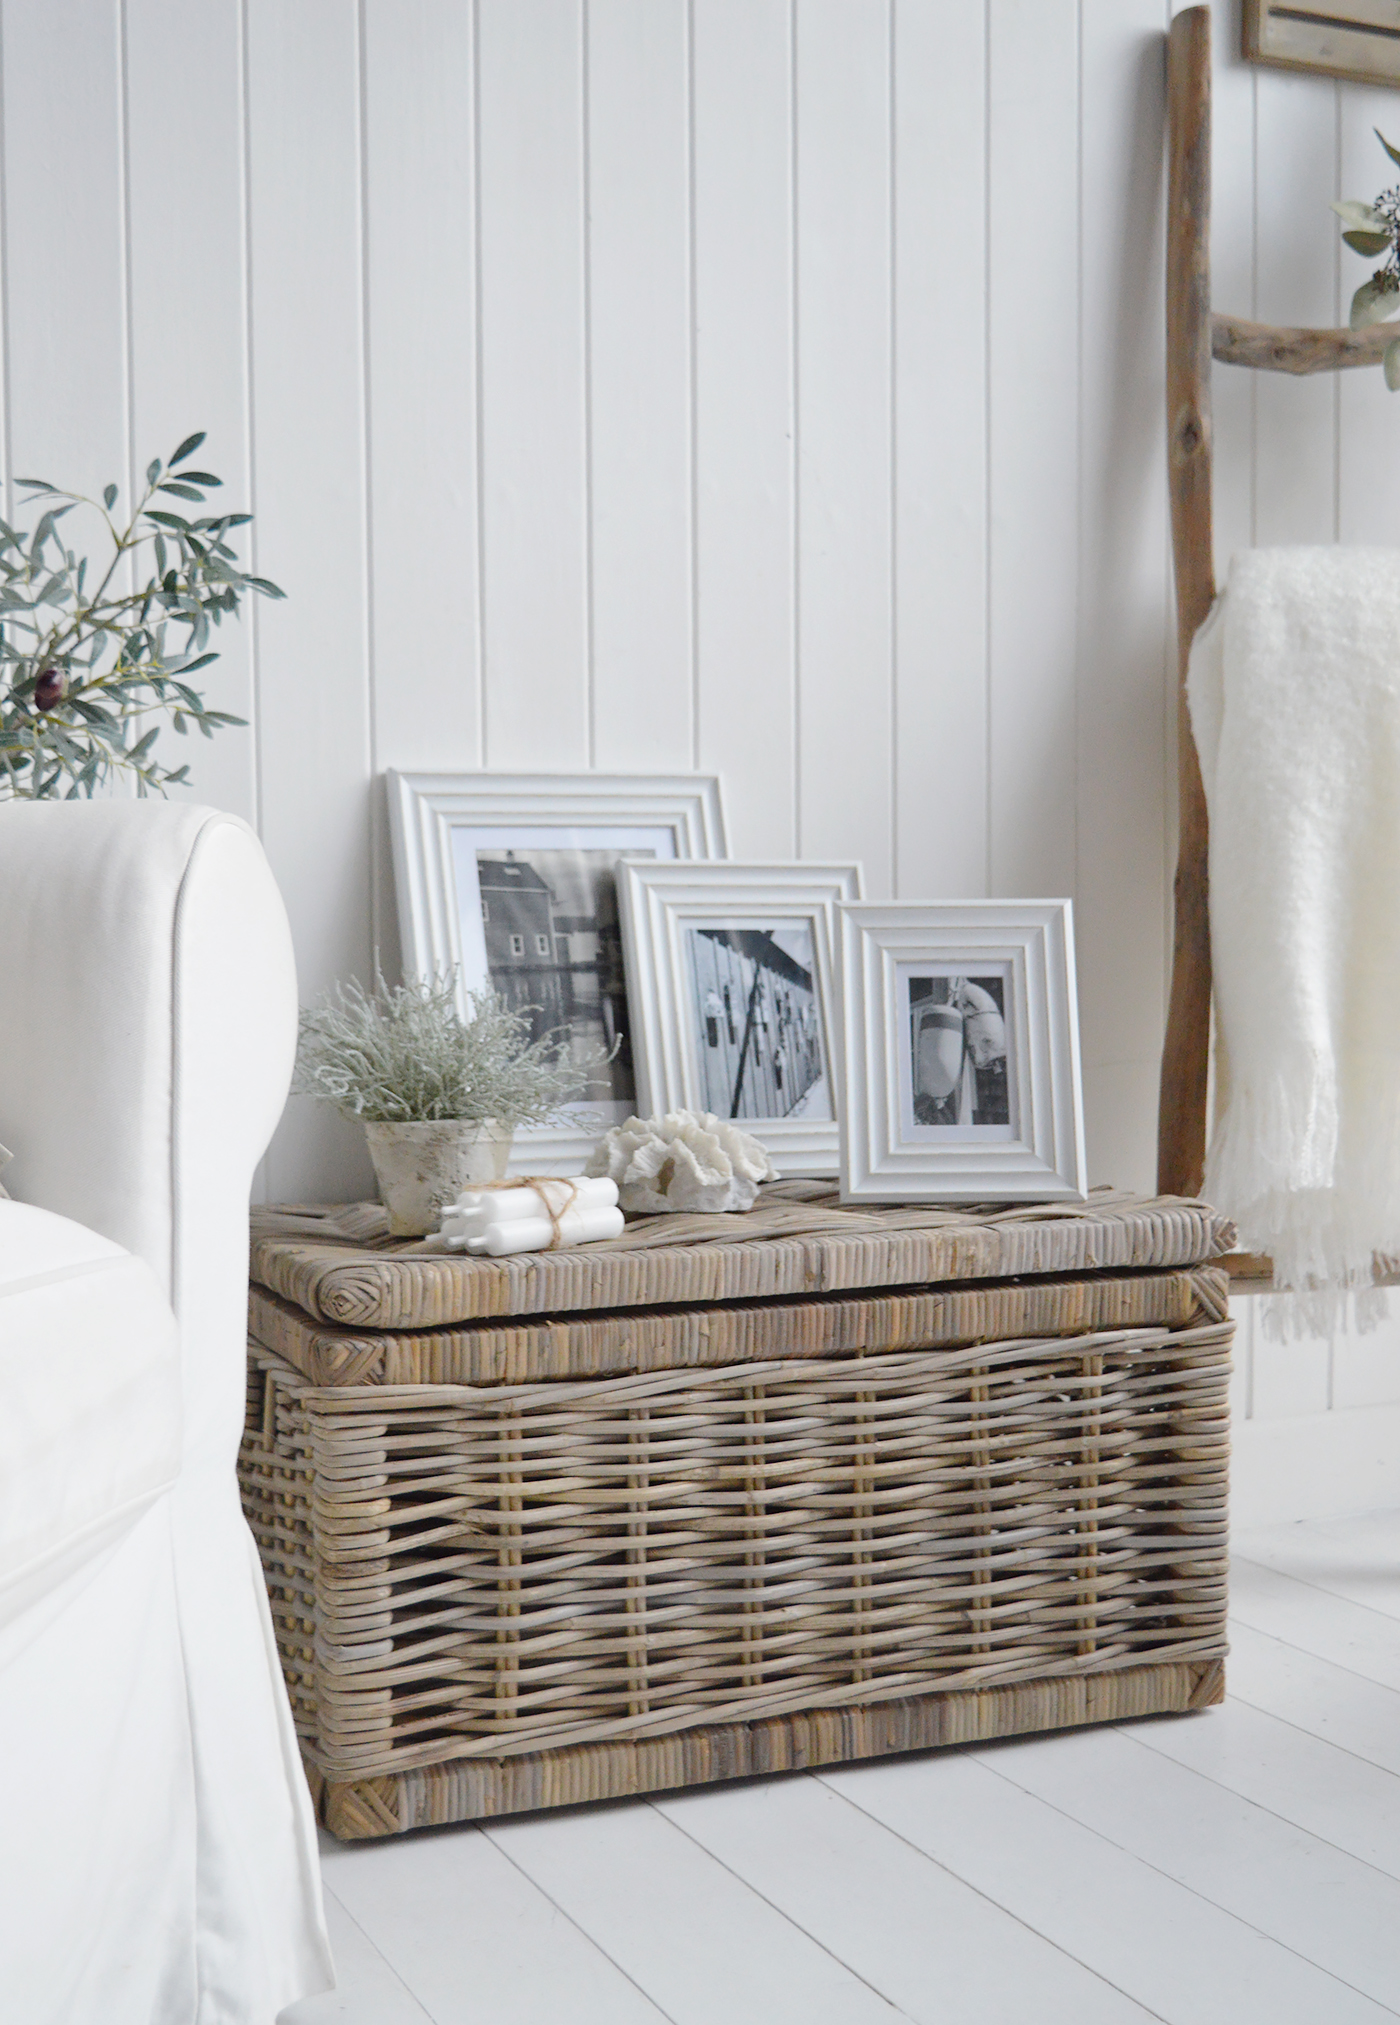 The Colebrook white photo frames displayed on the Seaside Basket